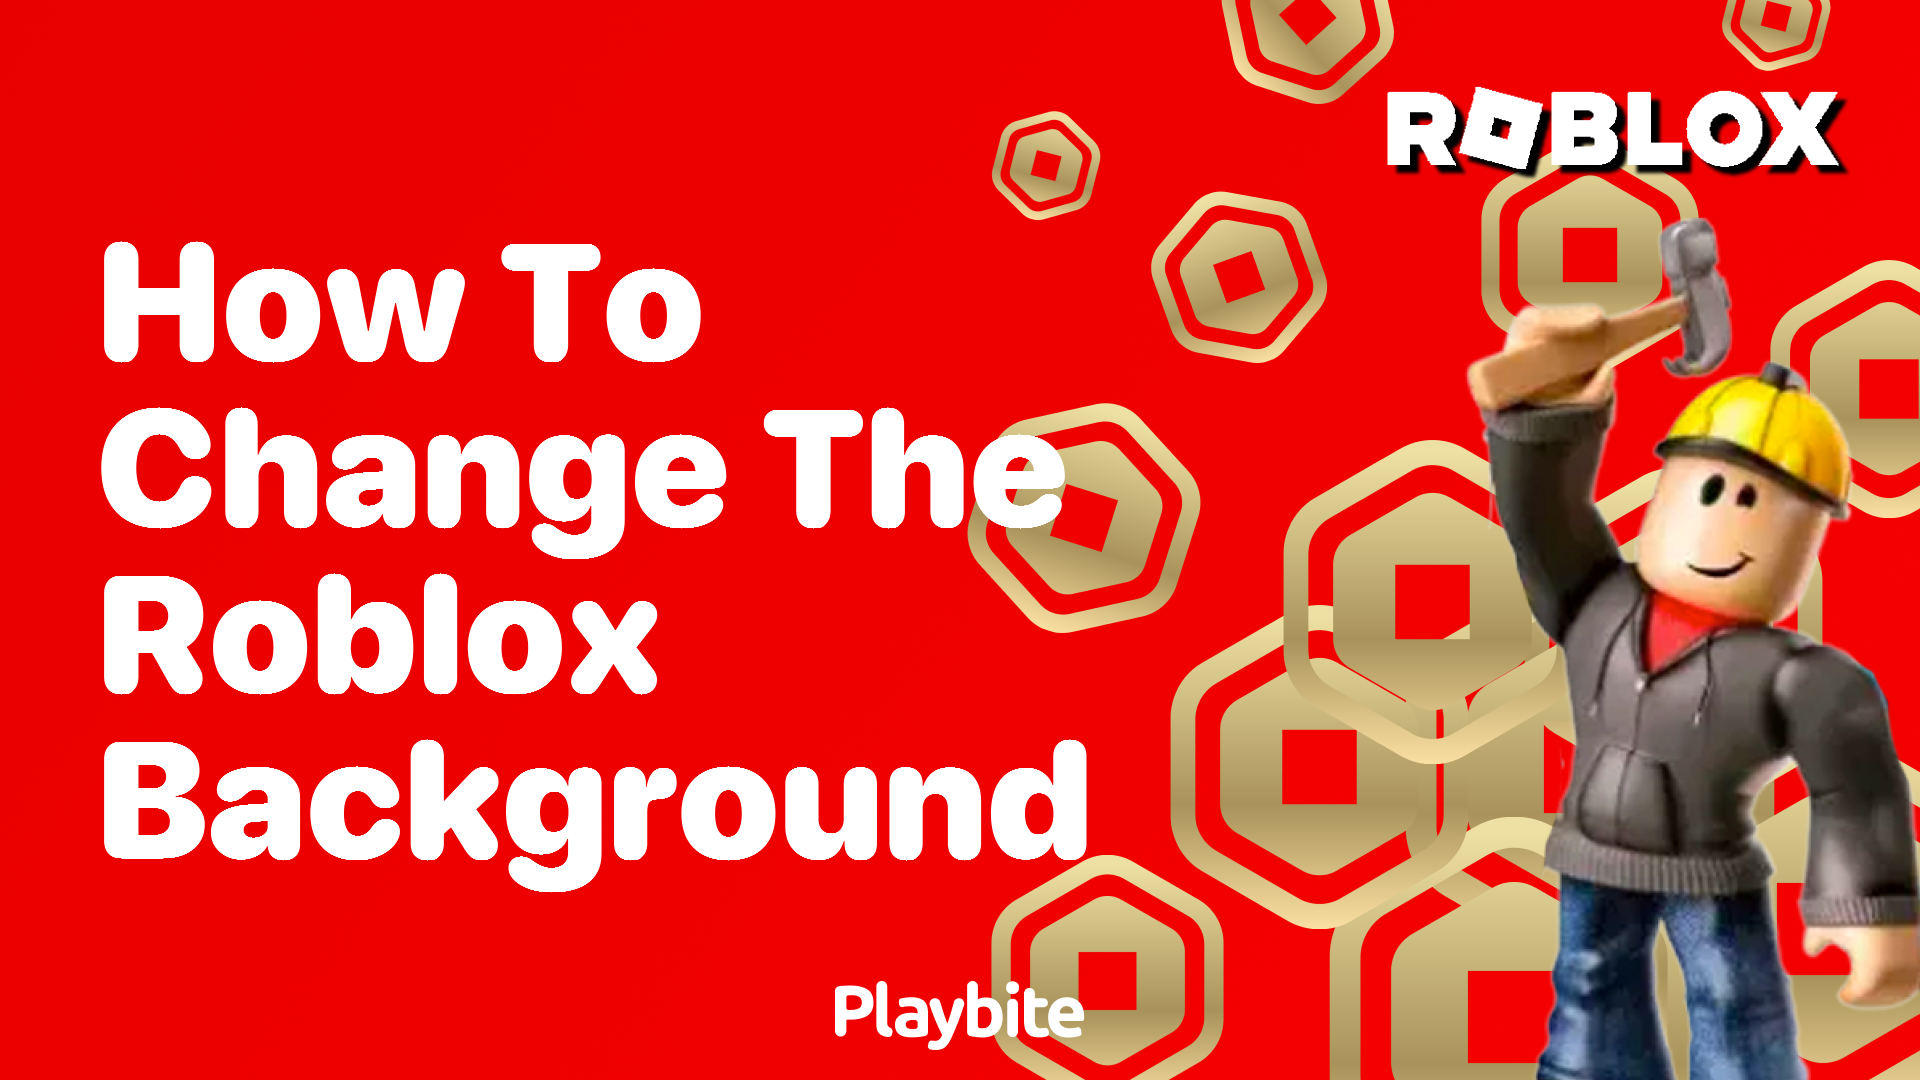 How to Change the Roblox Background: A Simple Guide